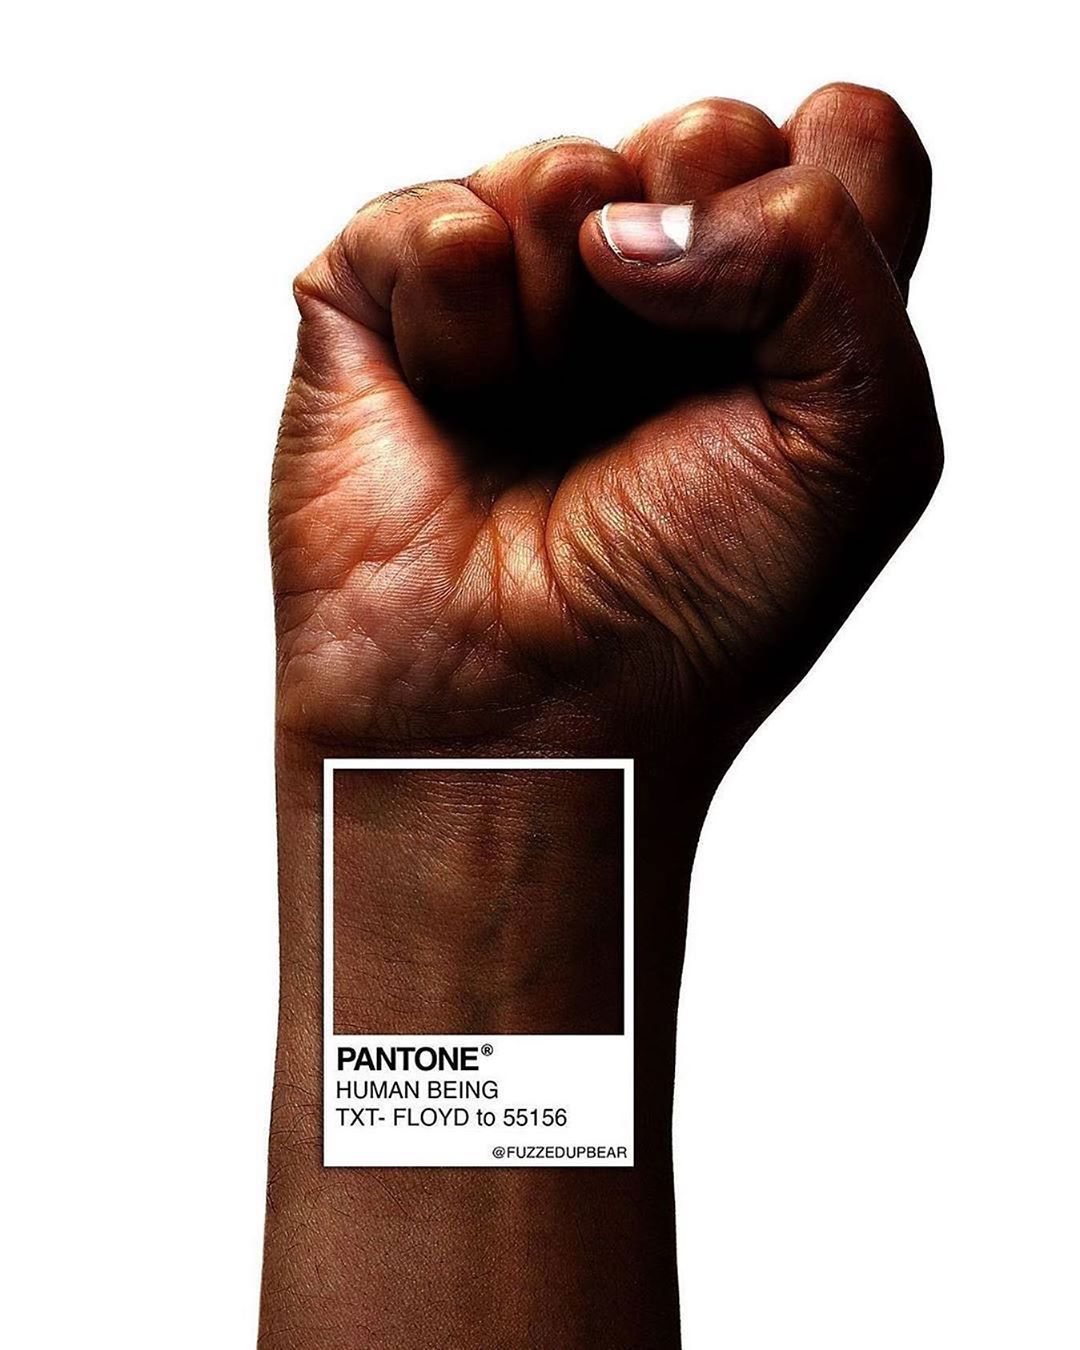 A Look At Fashion Brands' Responses To Police Brutality And The Black Lives Matter Movement